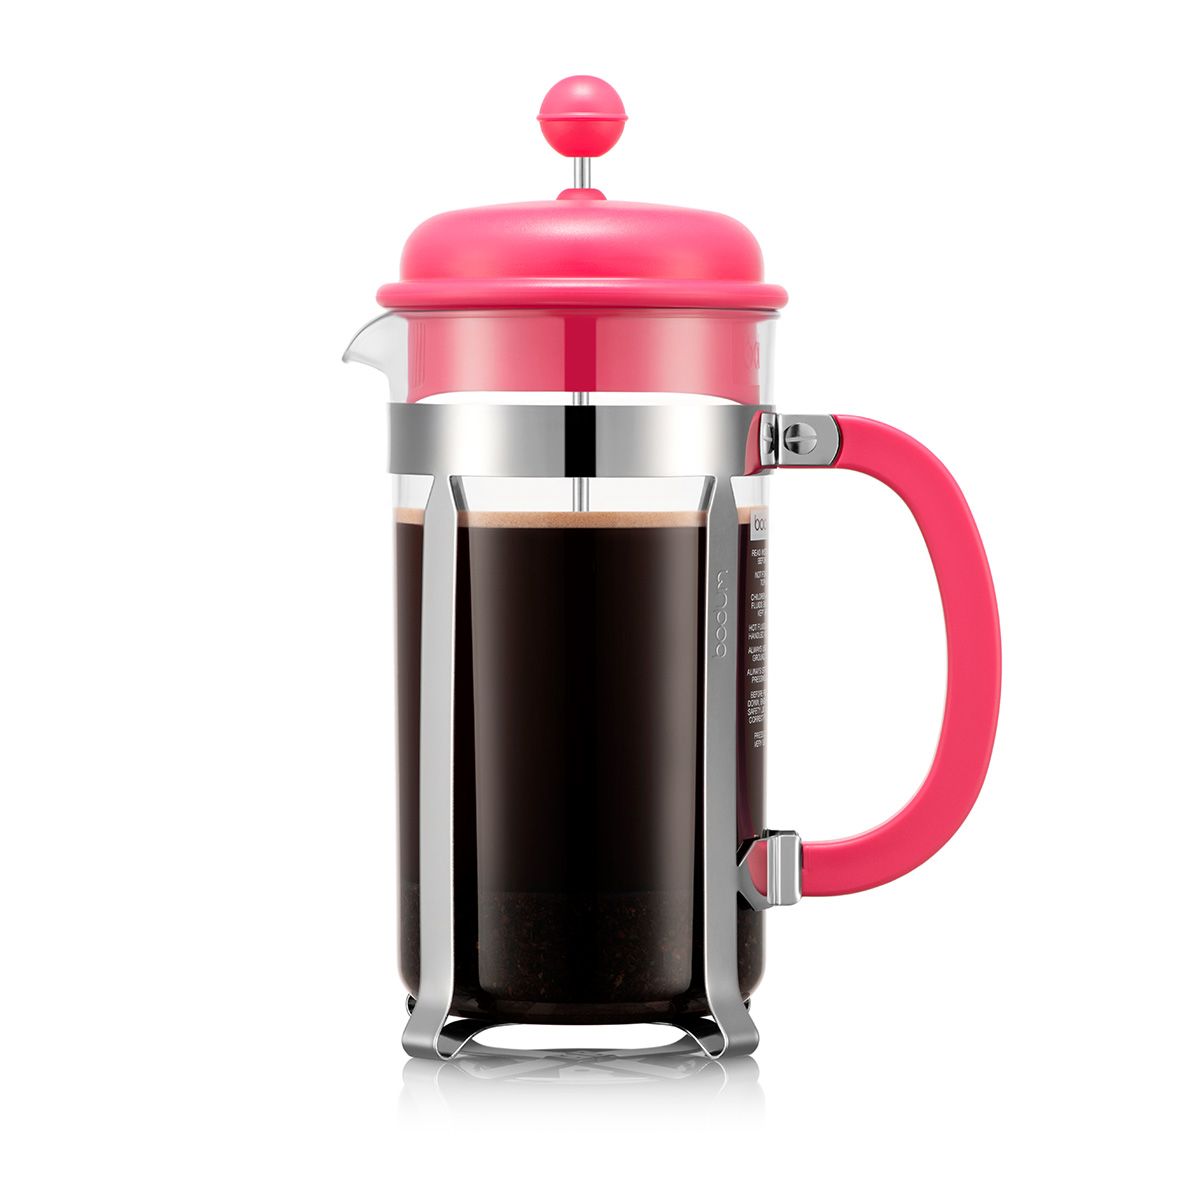 French Press Single Serving Coffee Maker, Small Affordable Coffee Brewer  with Highest Filtration, 1 Cup Capacity (12 fl oz/0.35 liter)